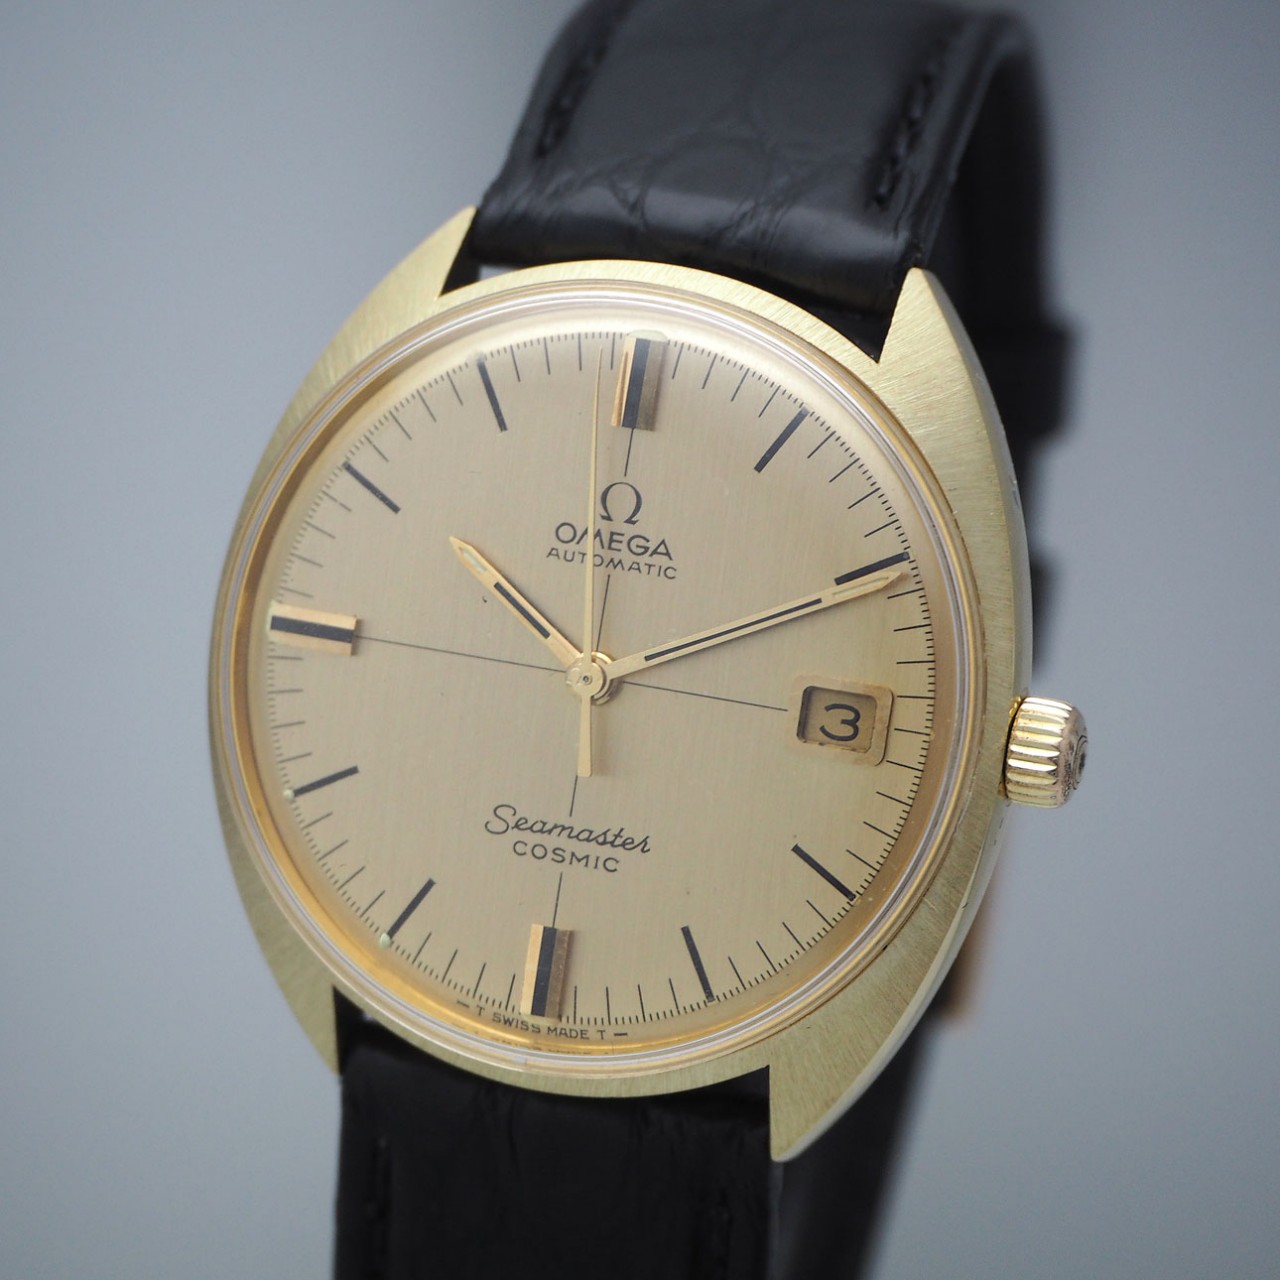 Omega Seamaster Cosmic 166.026, Gold 18k/750, &quot;cross-hair dial&quot;, serviced